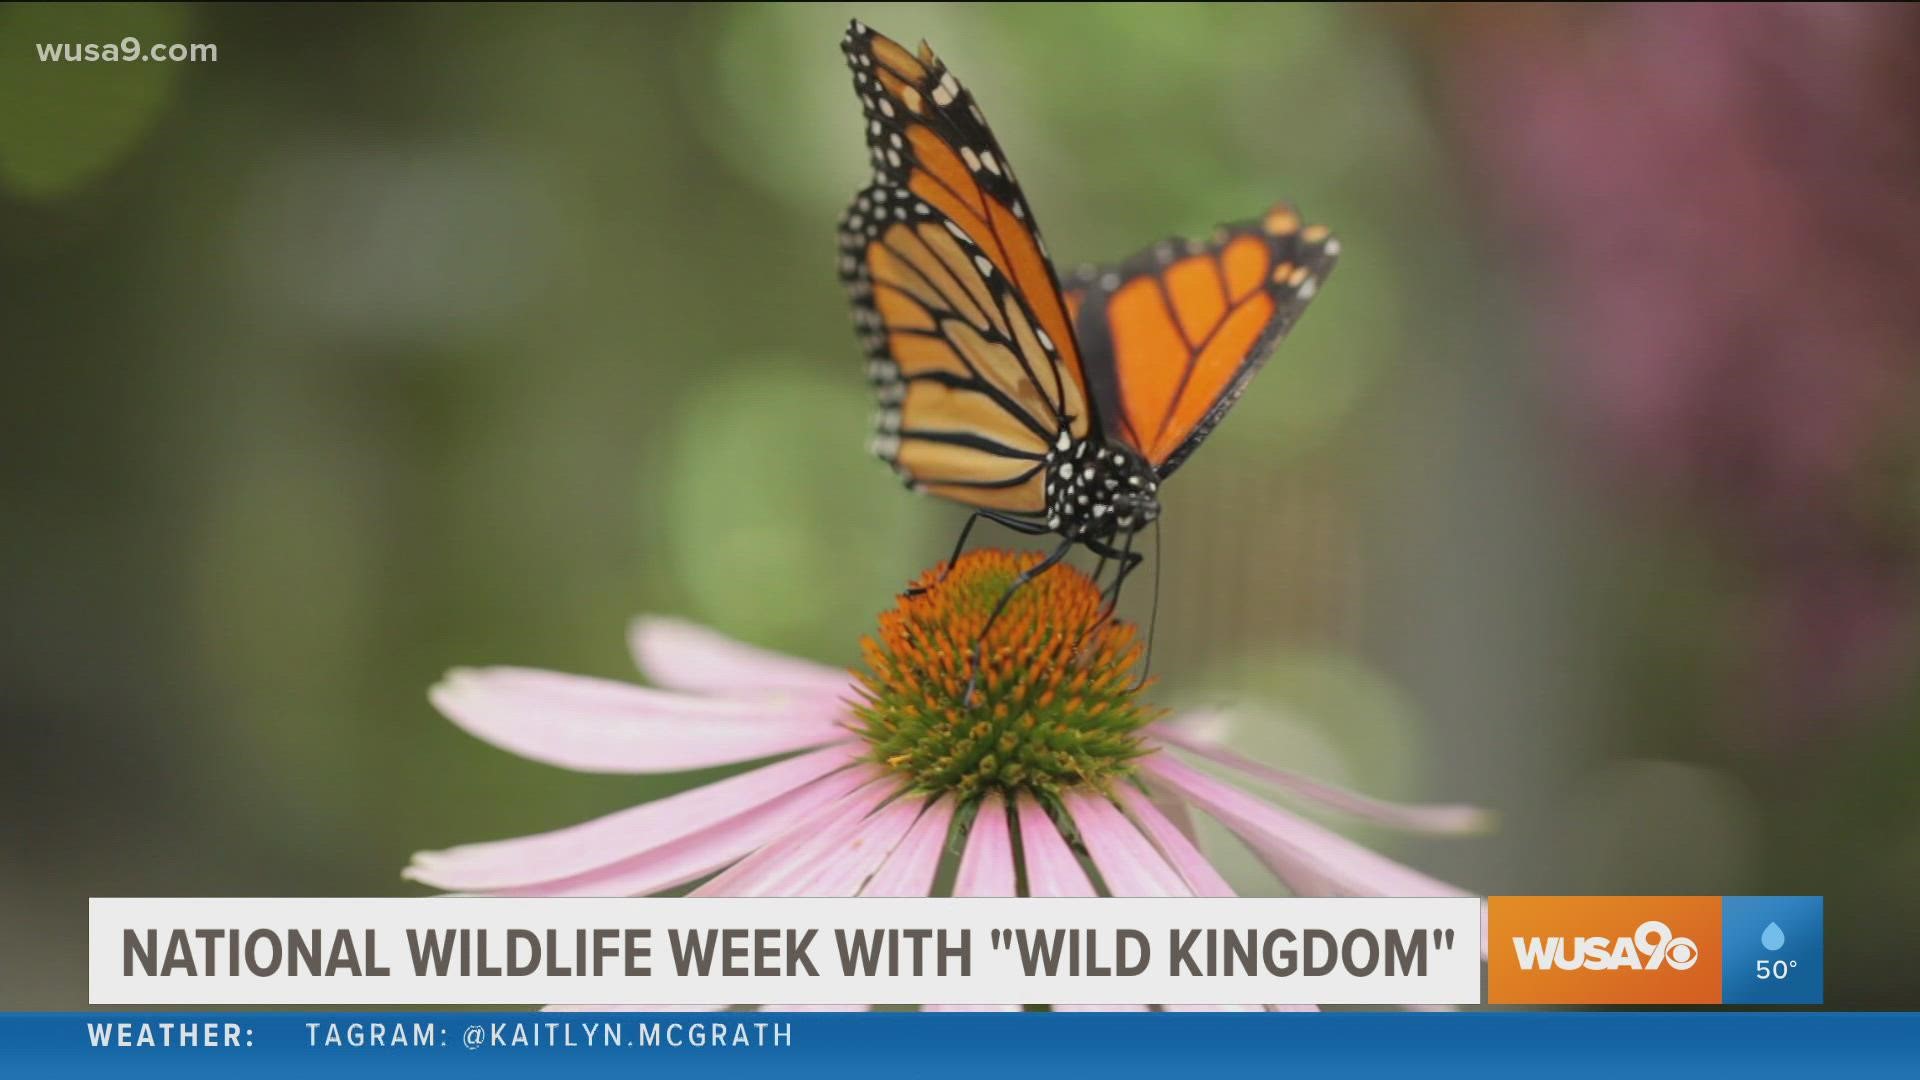 During National Wildlife Week with "Wild Kingdom" experts explain why it's important to protect and enjoy our wildlife neighbors.